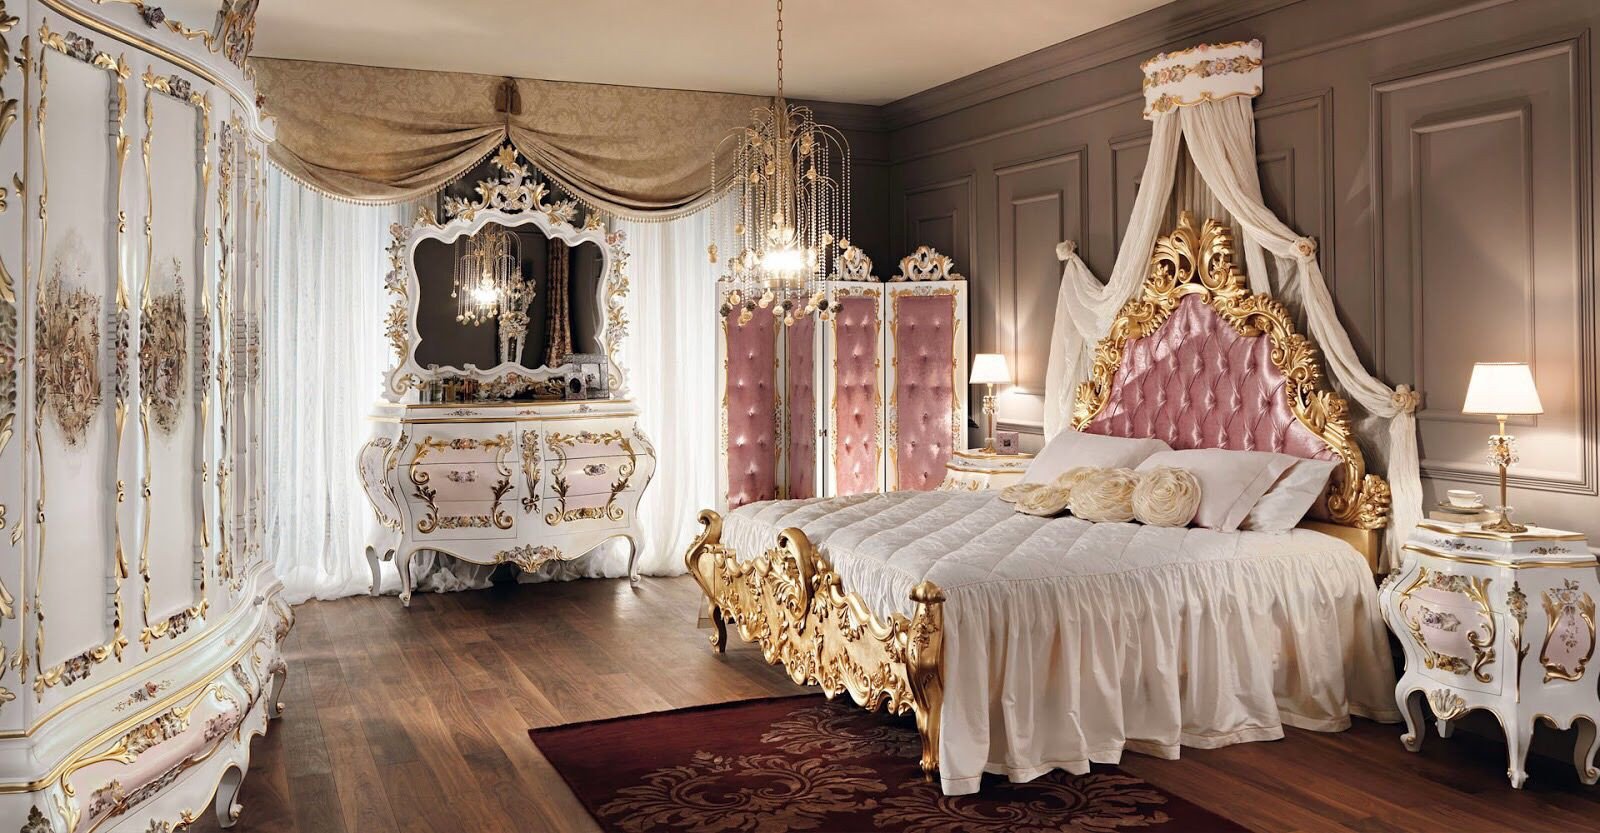 Pink and Gold Bedroom Set Best Of Odd Choice for A Rug